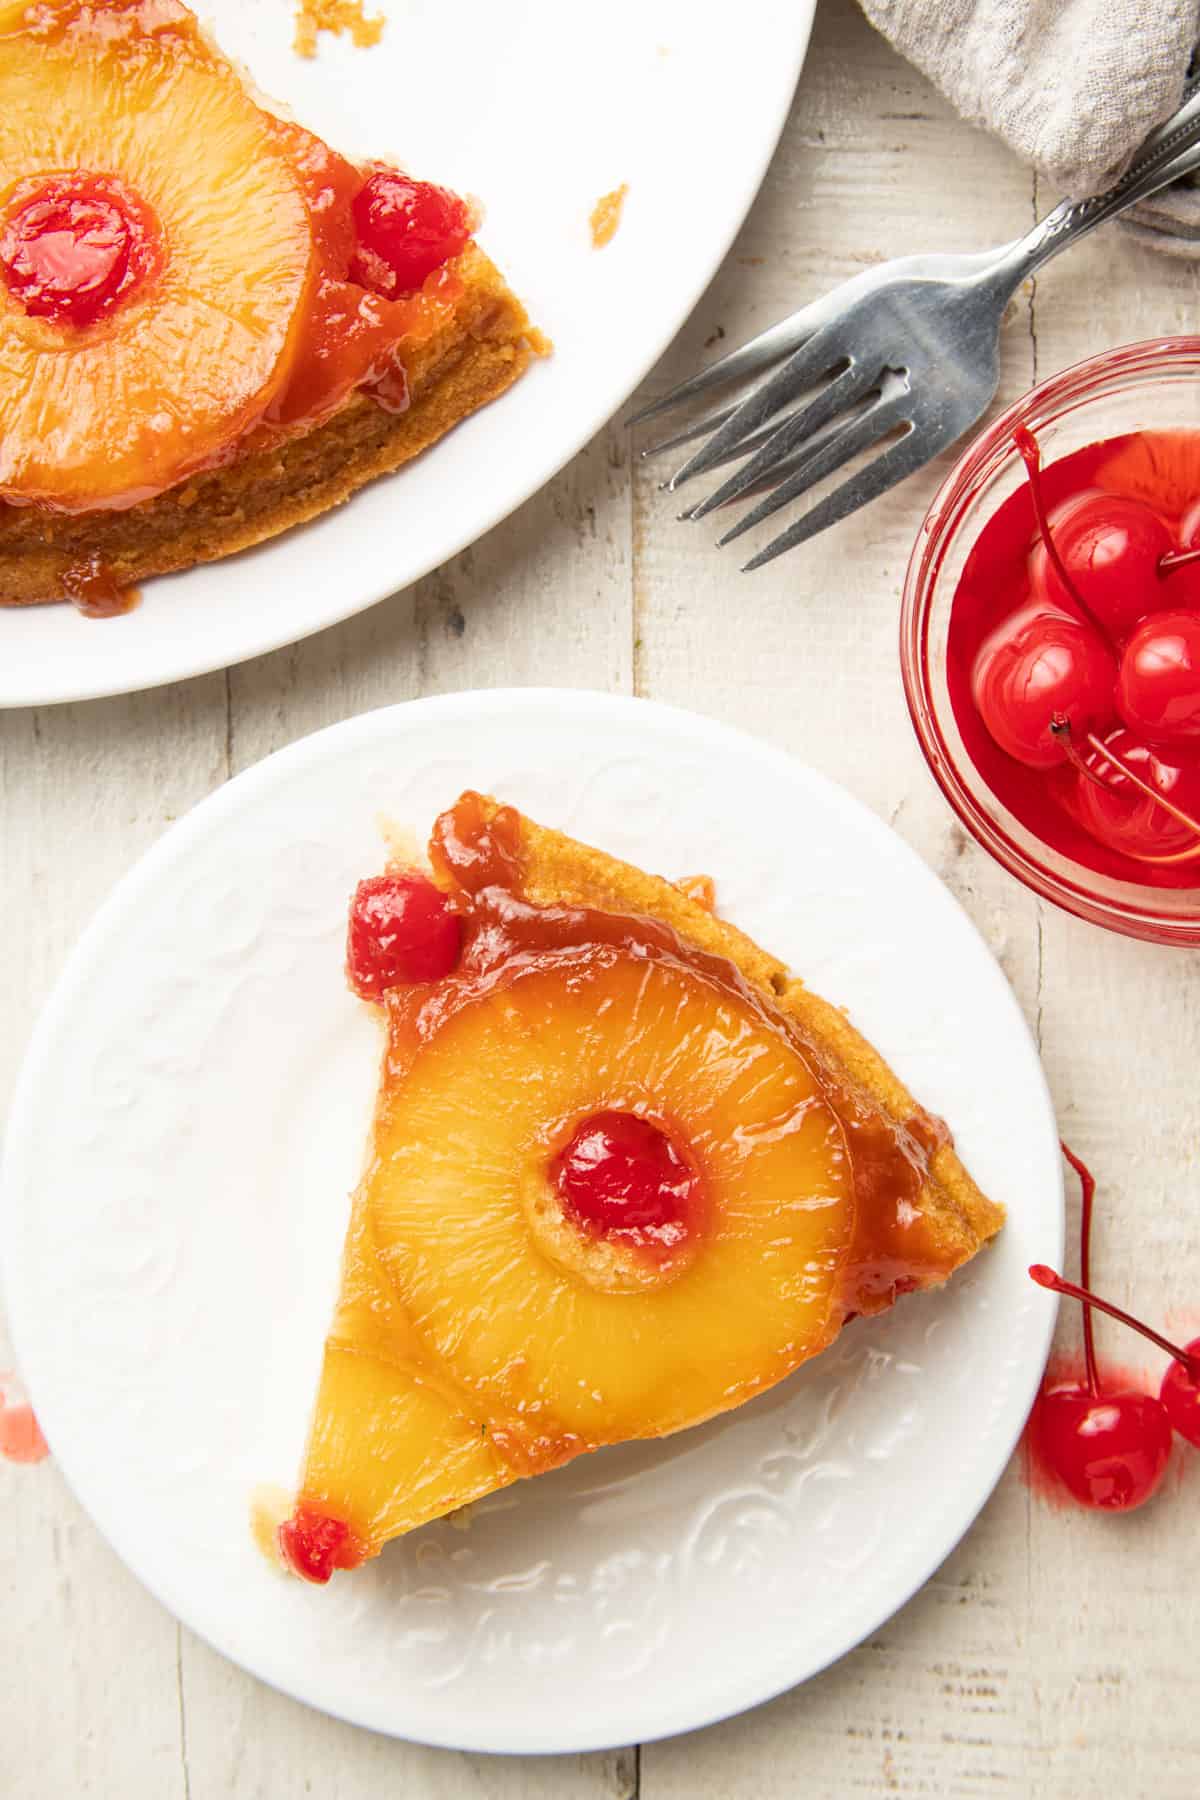 White surface set with slice of Vegan Pineapple Upside Down Cake on a plate, dish of cherries and forks.